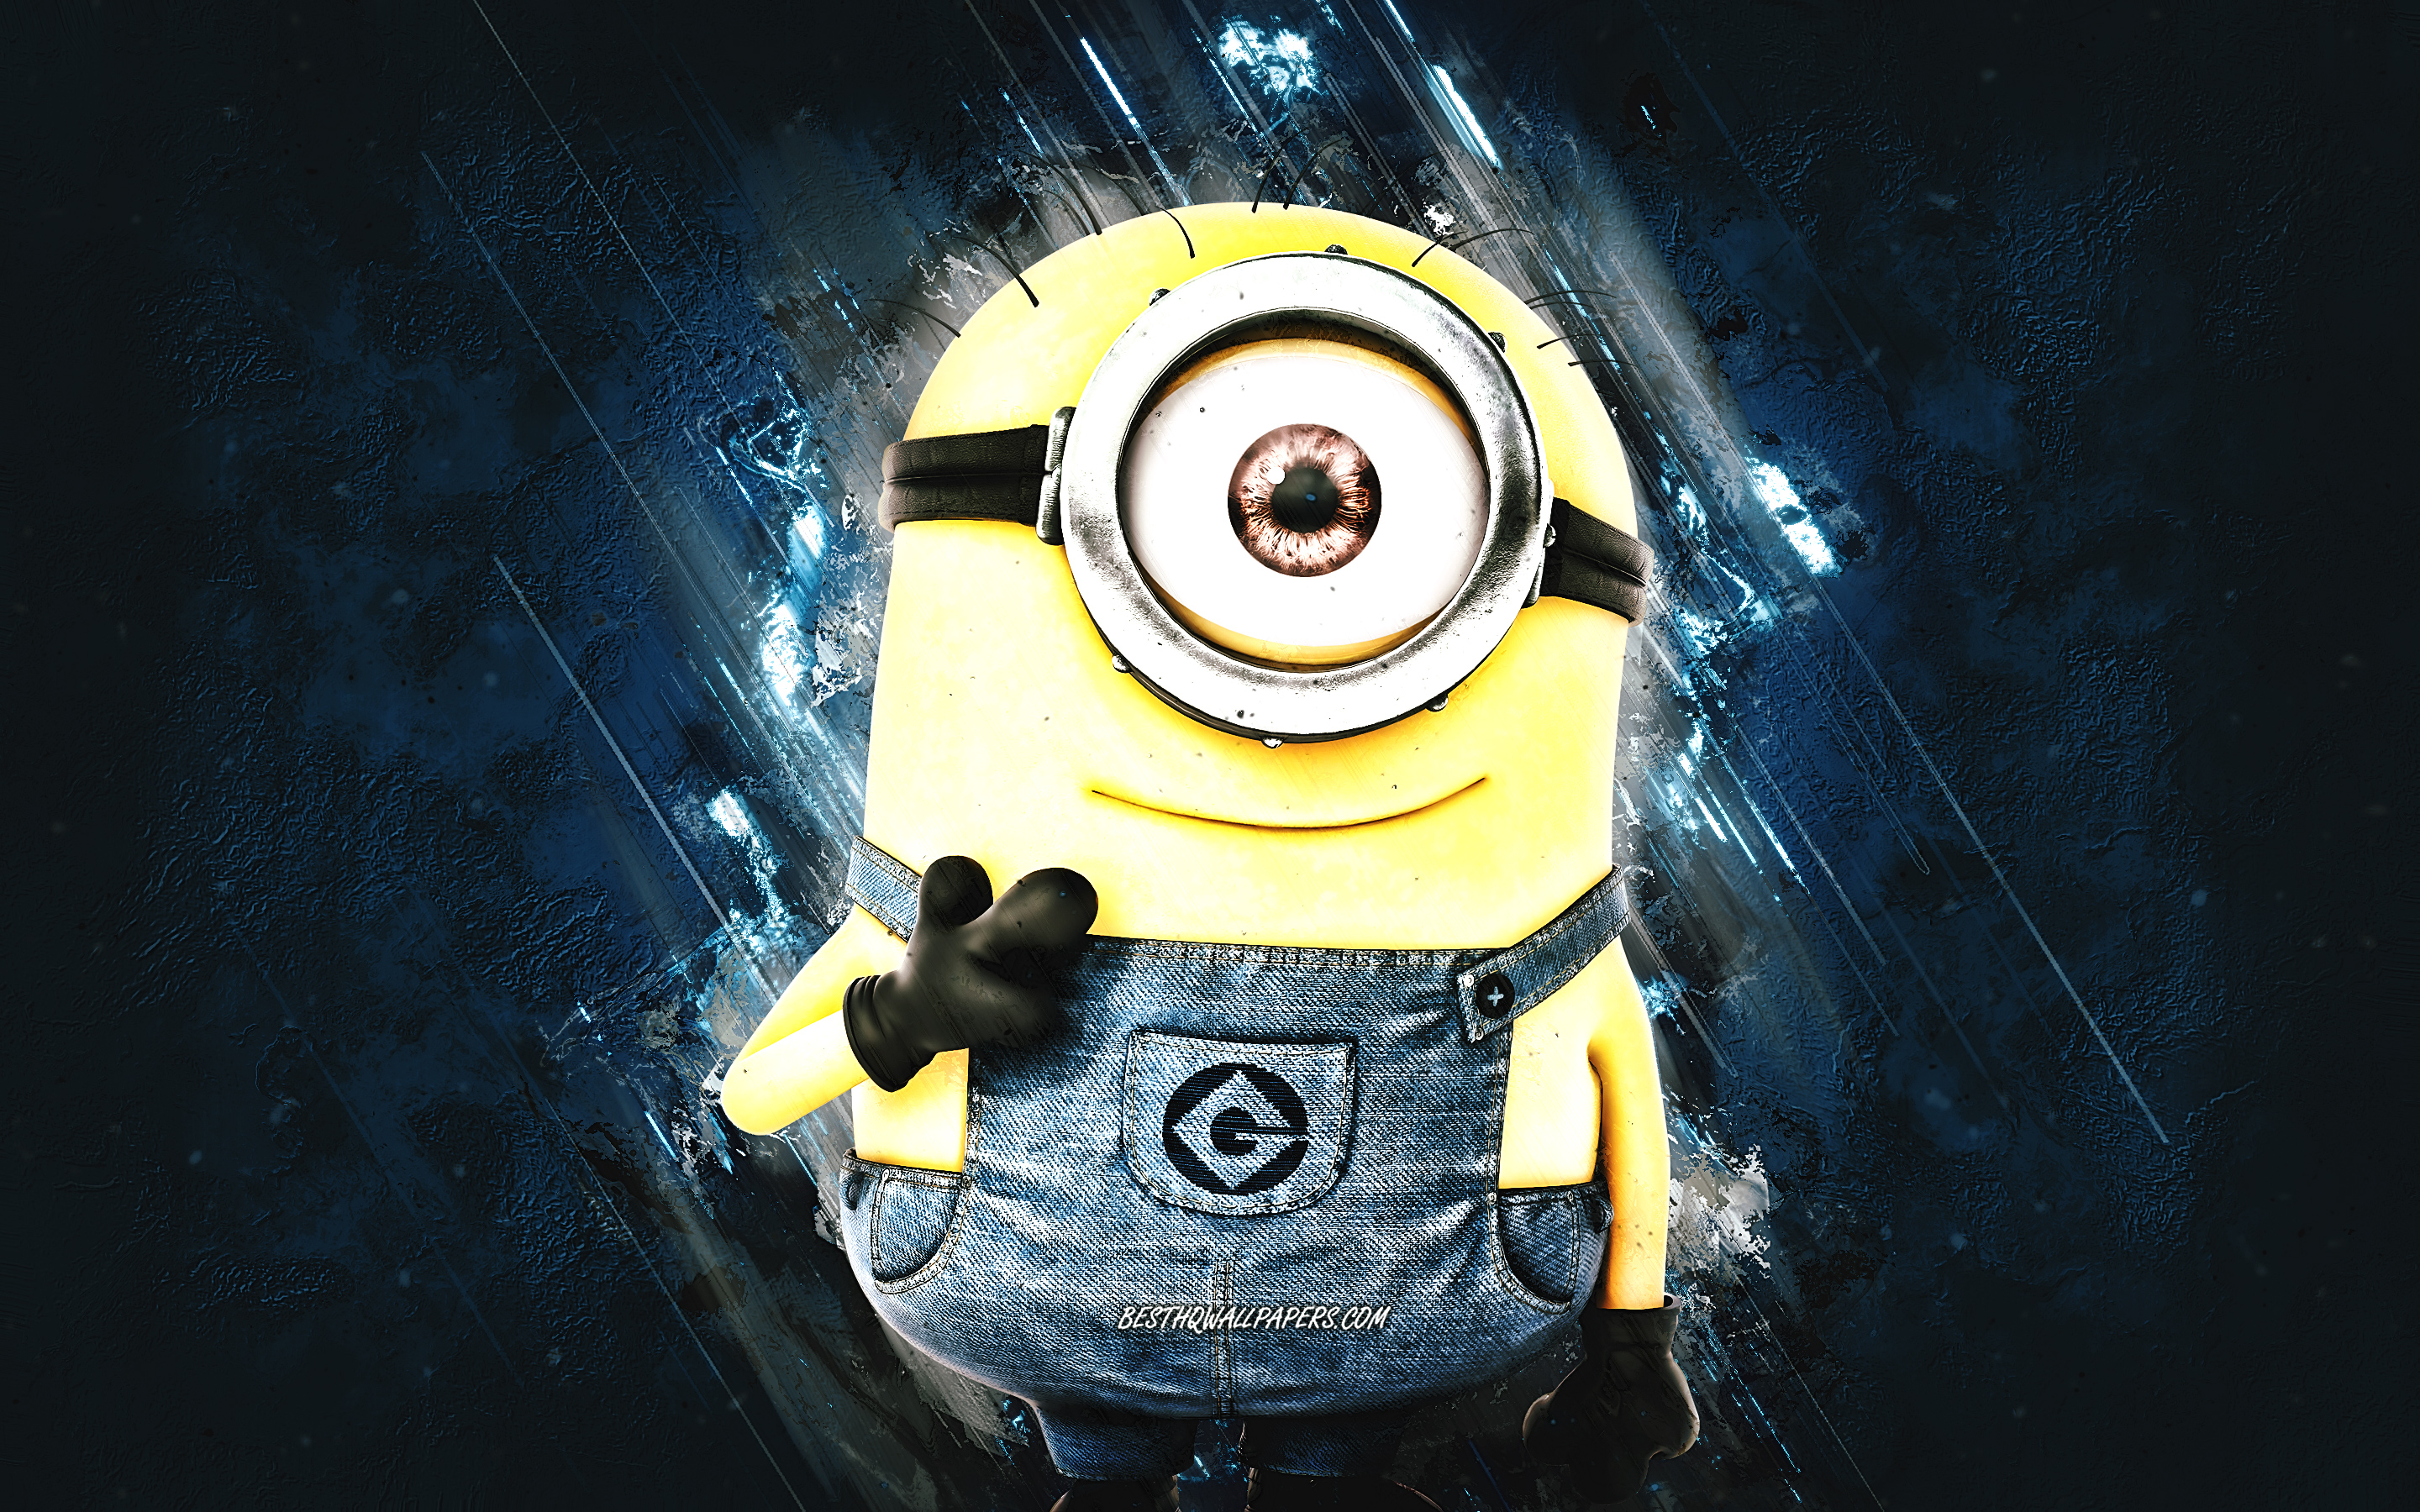 Download wallpaper Carl, Despicable Me, minions, Carl the Minion, blue stone background, Despicable Me characters, Carl Minion for desktop with resolution 2880x1800. High Quality HD picture wallpaper